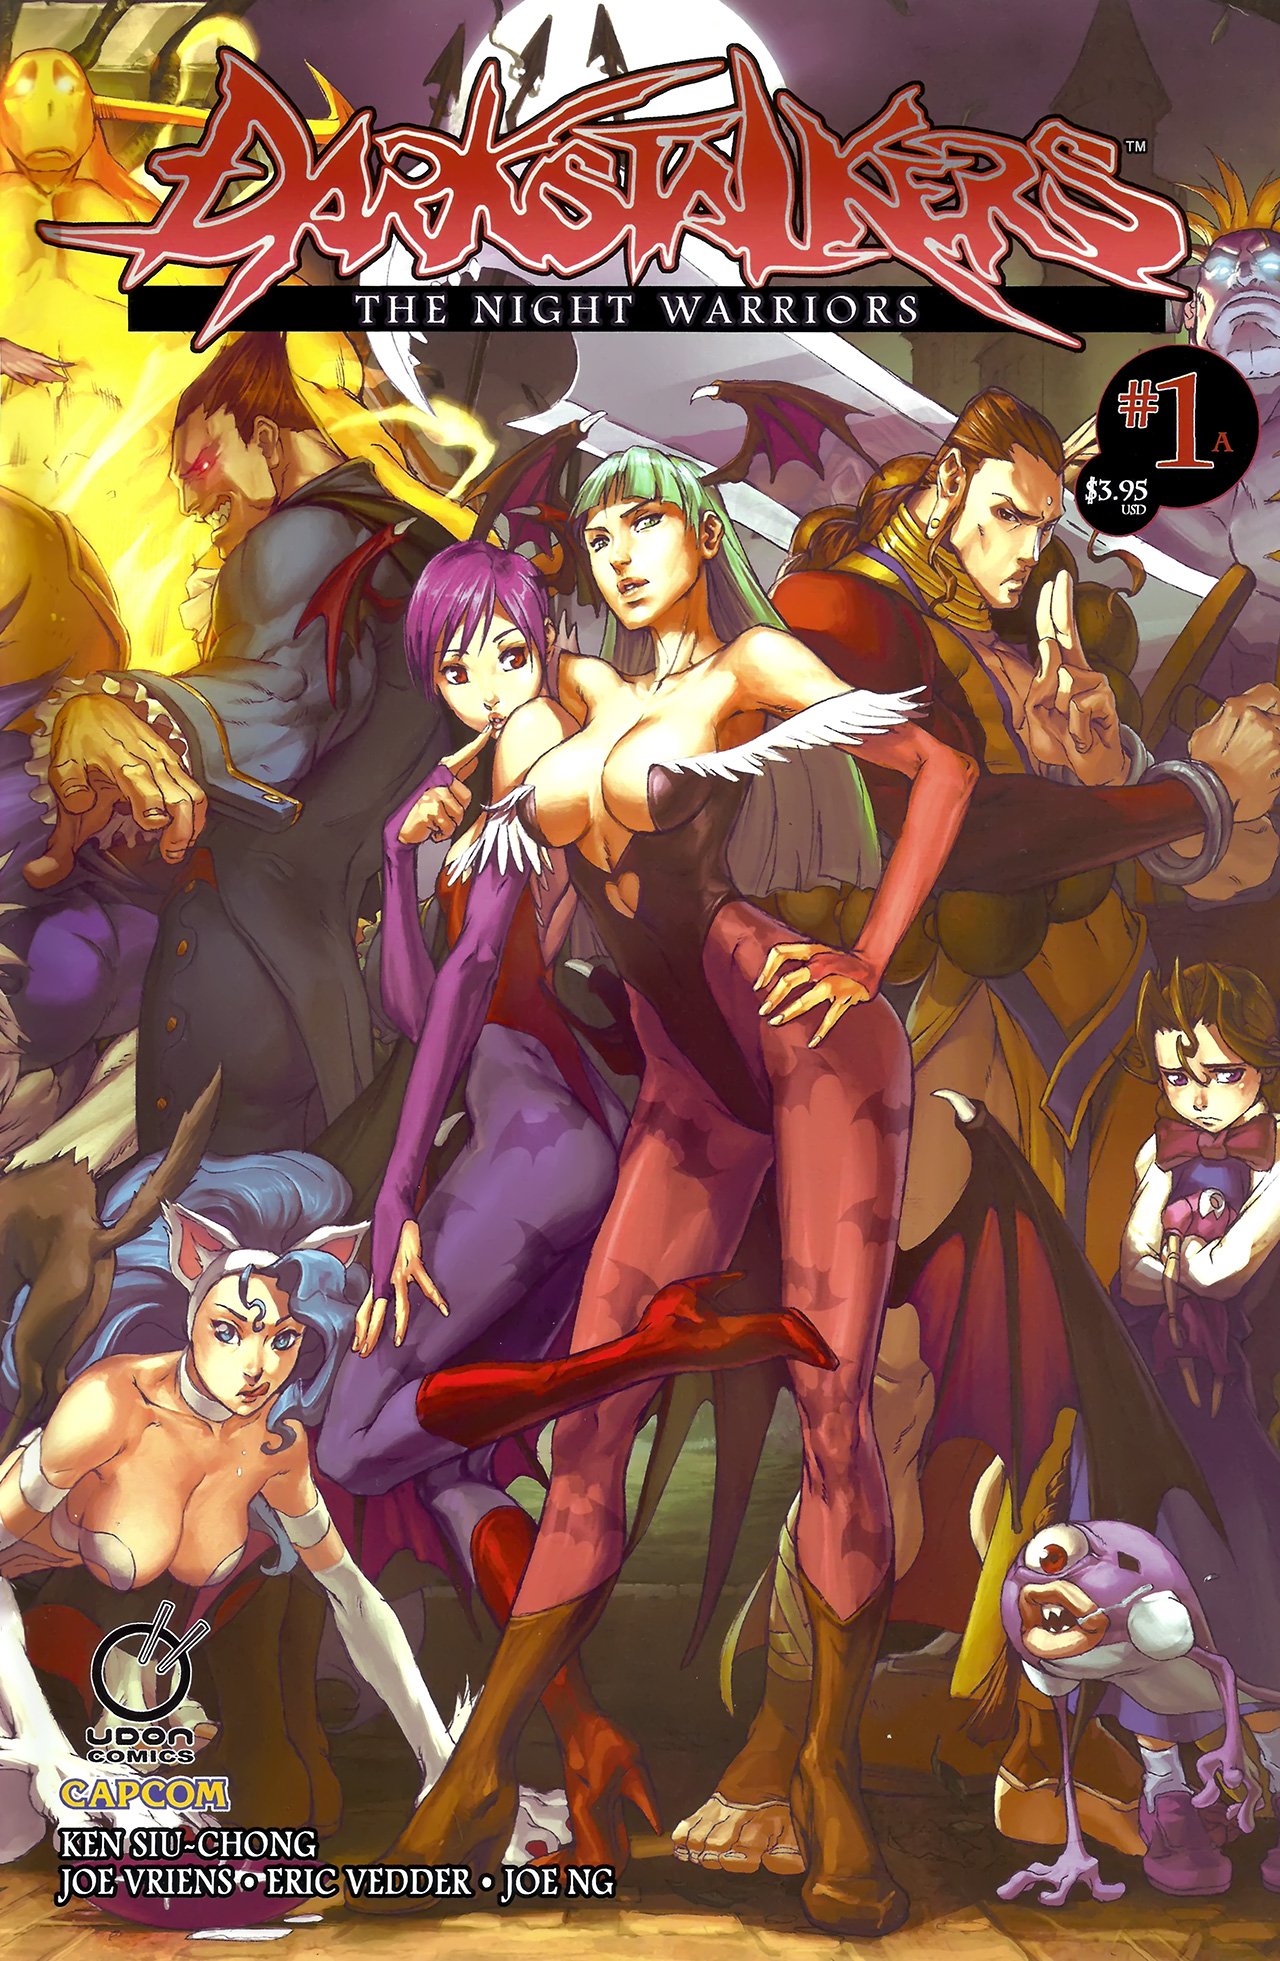 Darkstalkers: The Night Warriors 01 (February 2010) (Cover A)